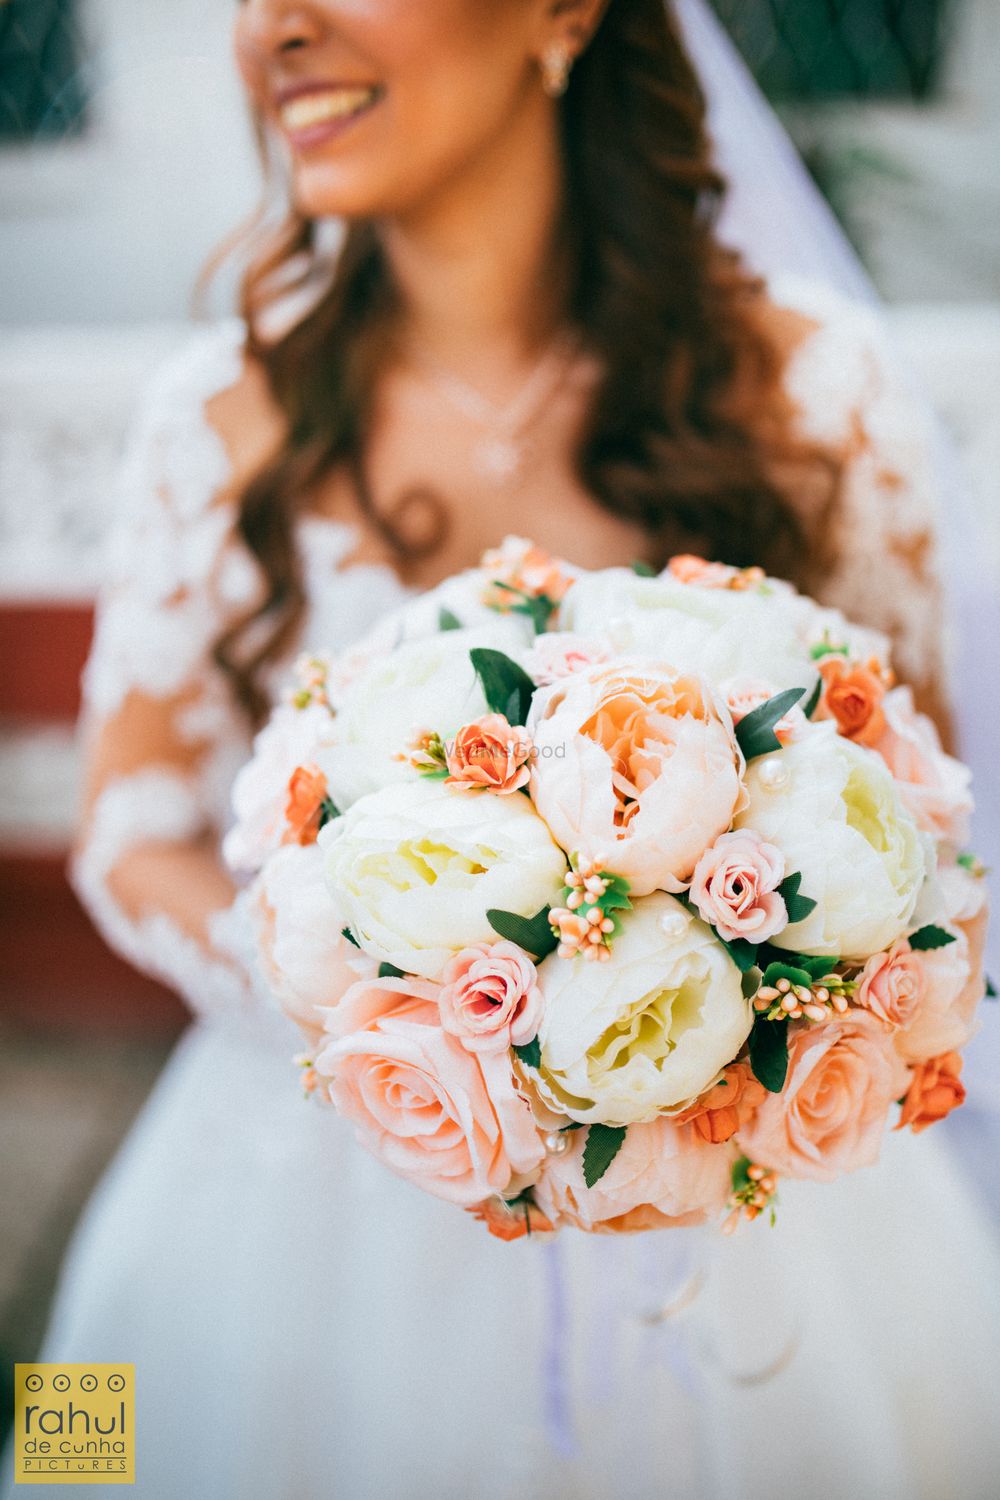 Photo of Bride holding a pastel-hued floral bouquet.